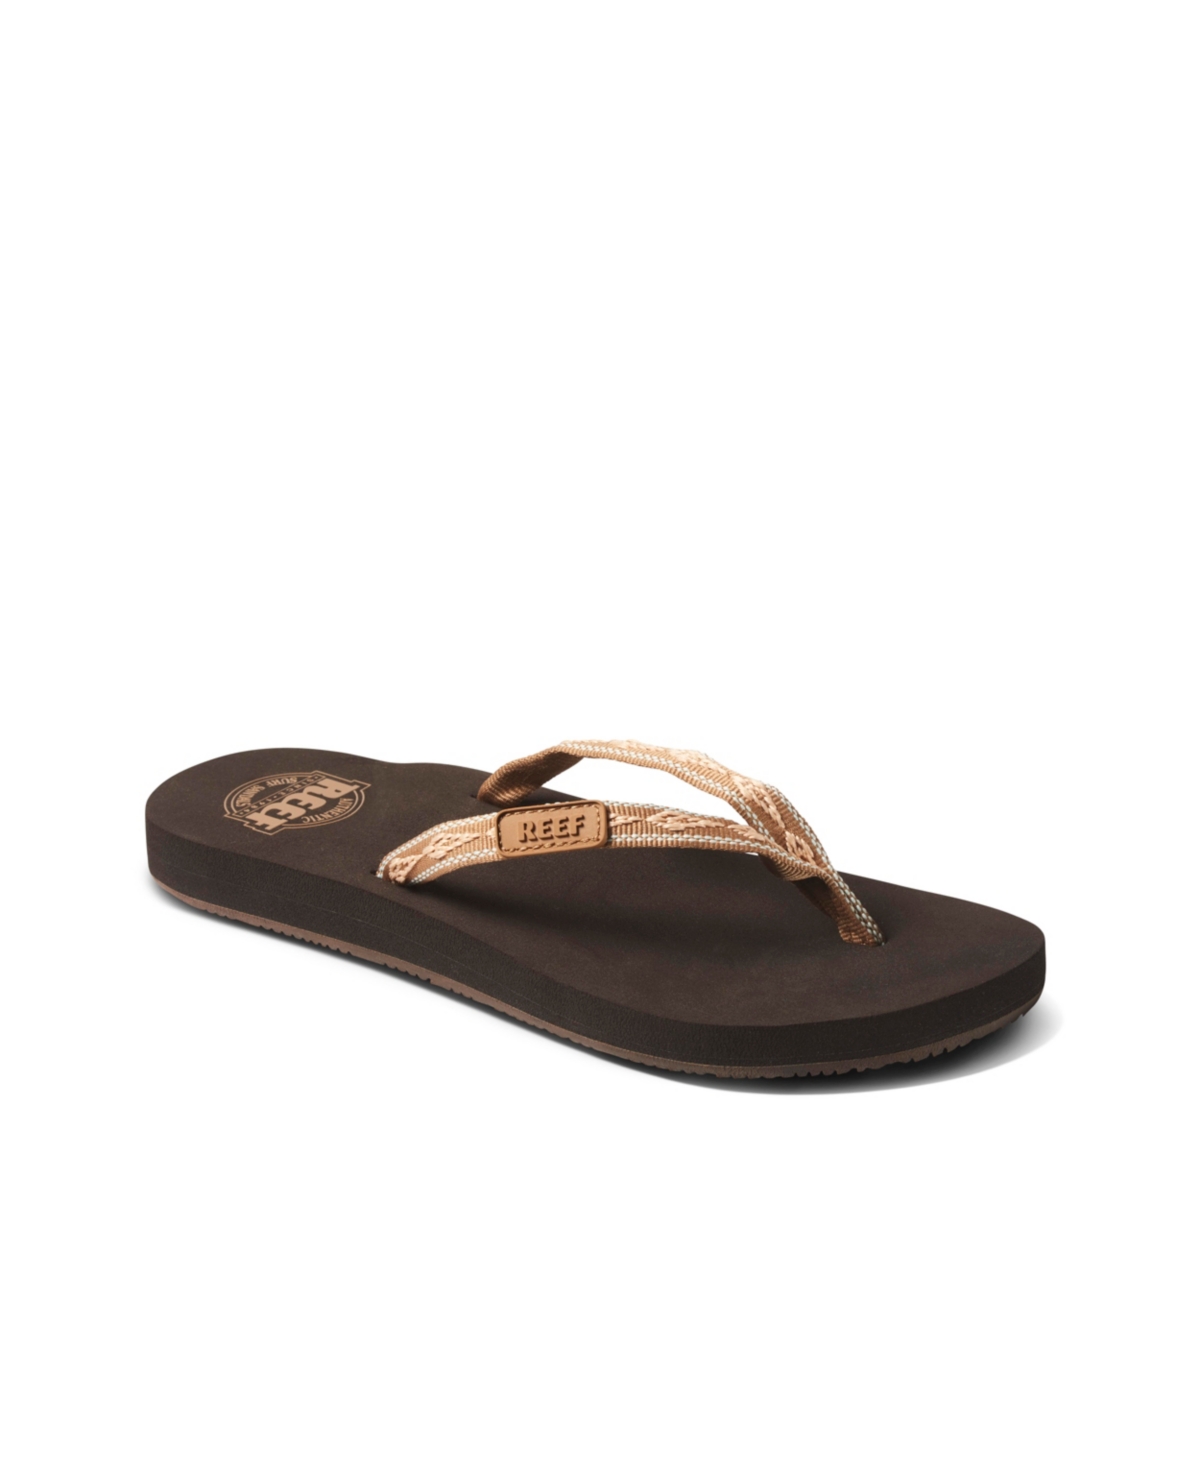 Reef Ginger Thong Sandals In Brown Peach